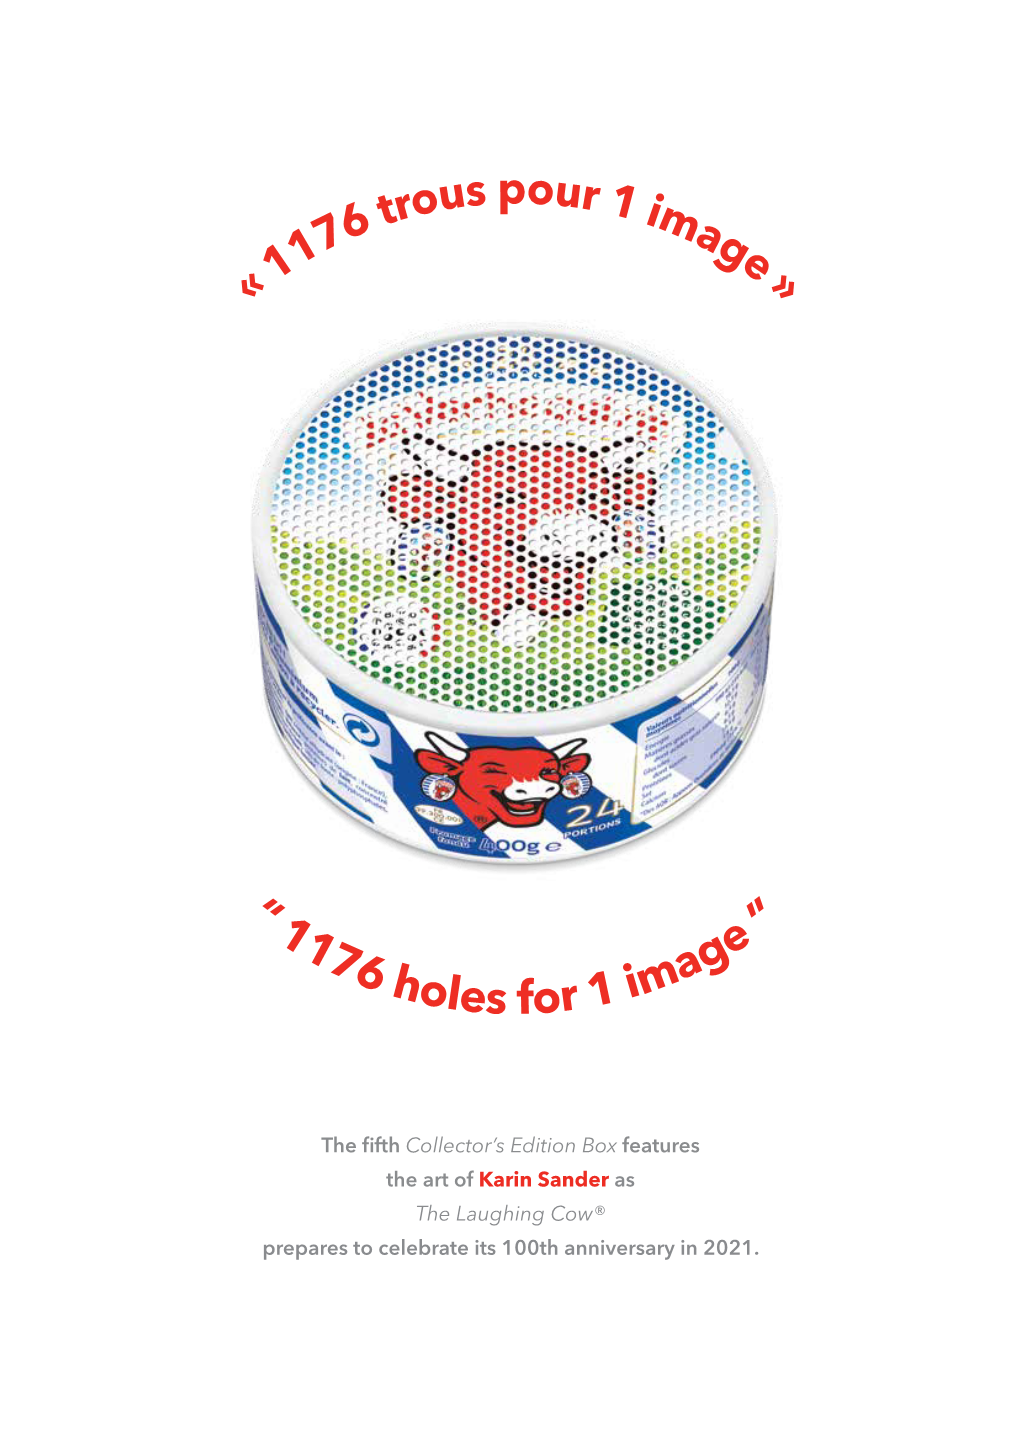 “ 1176 Holes for 1 Image ”